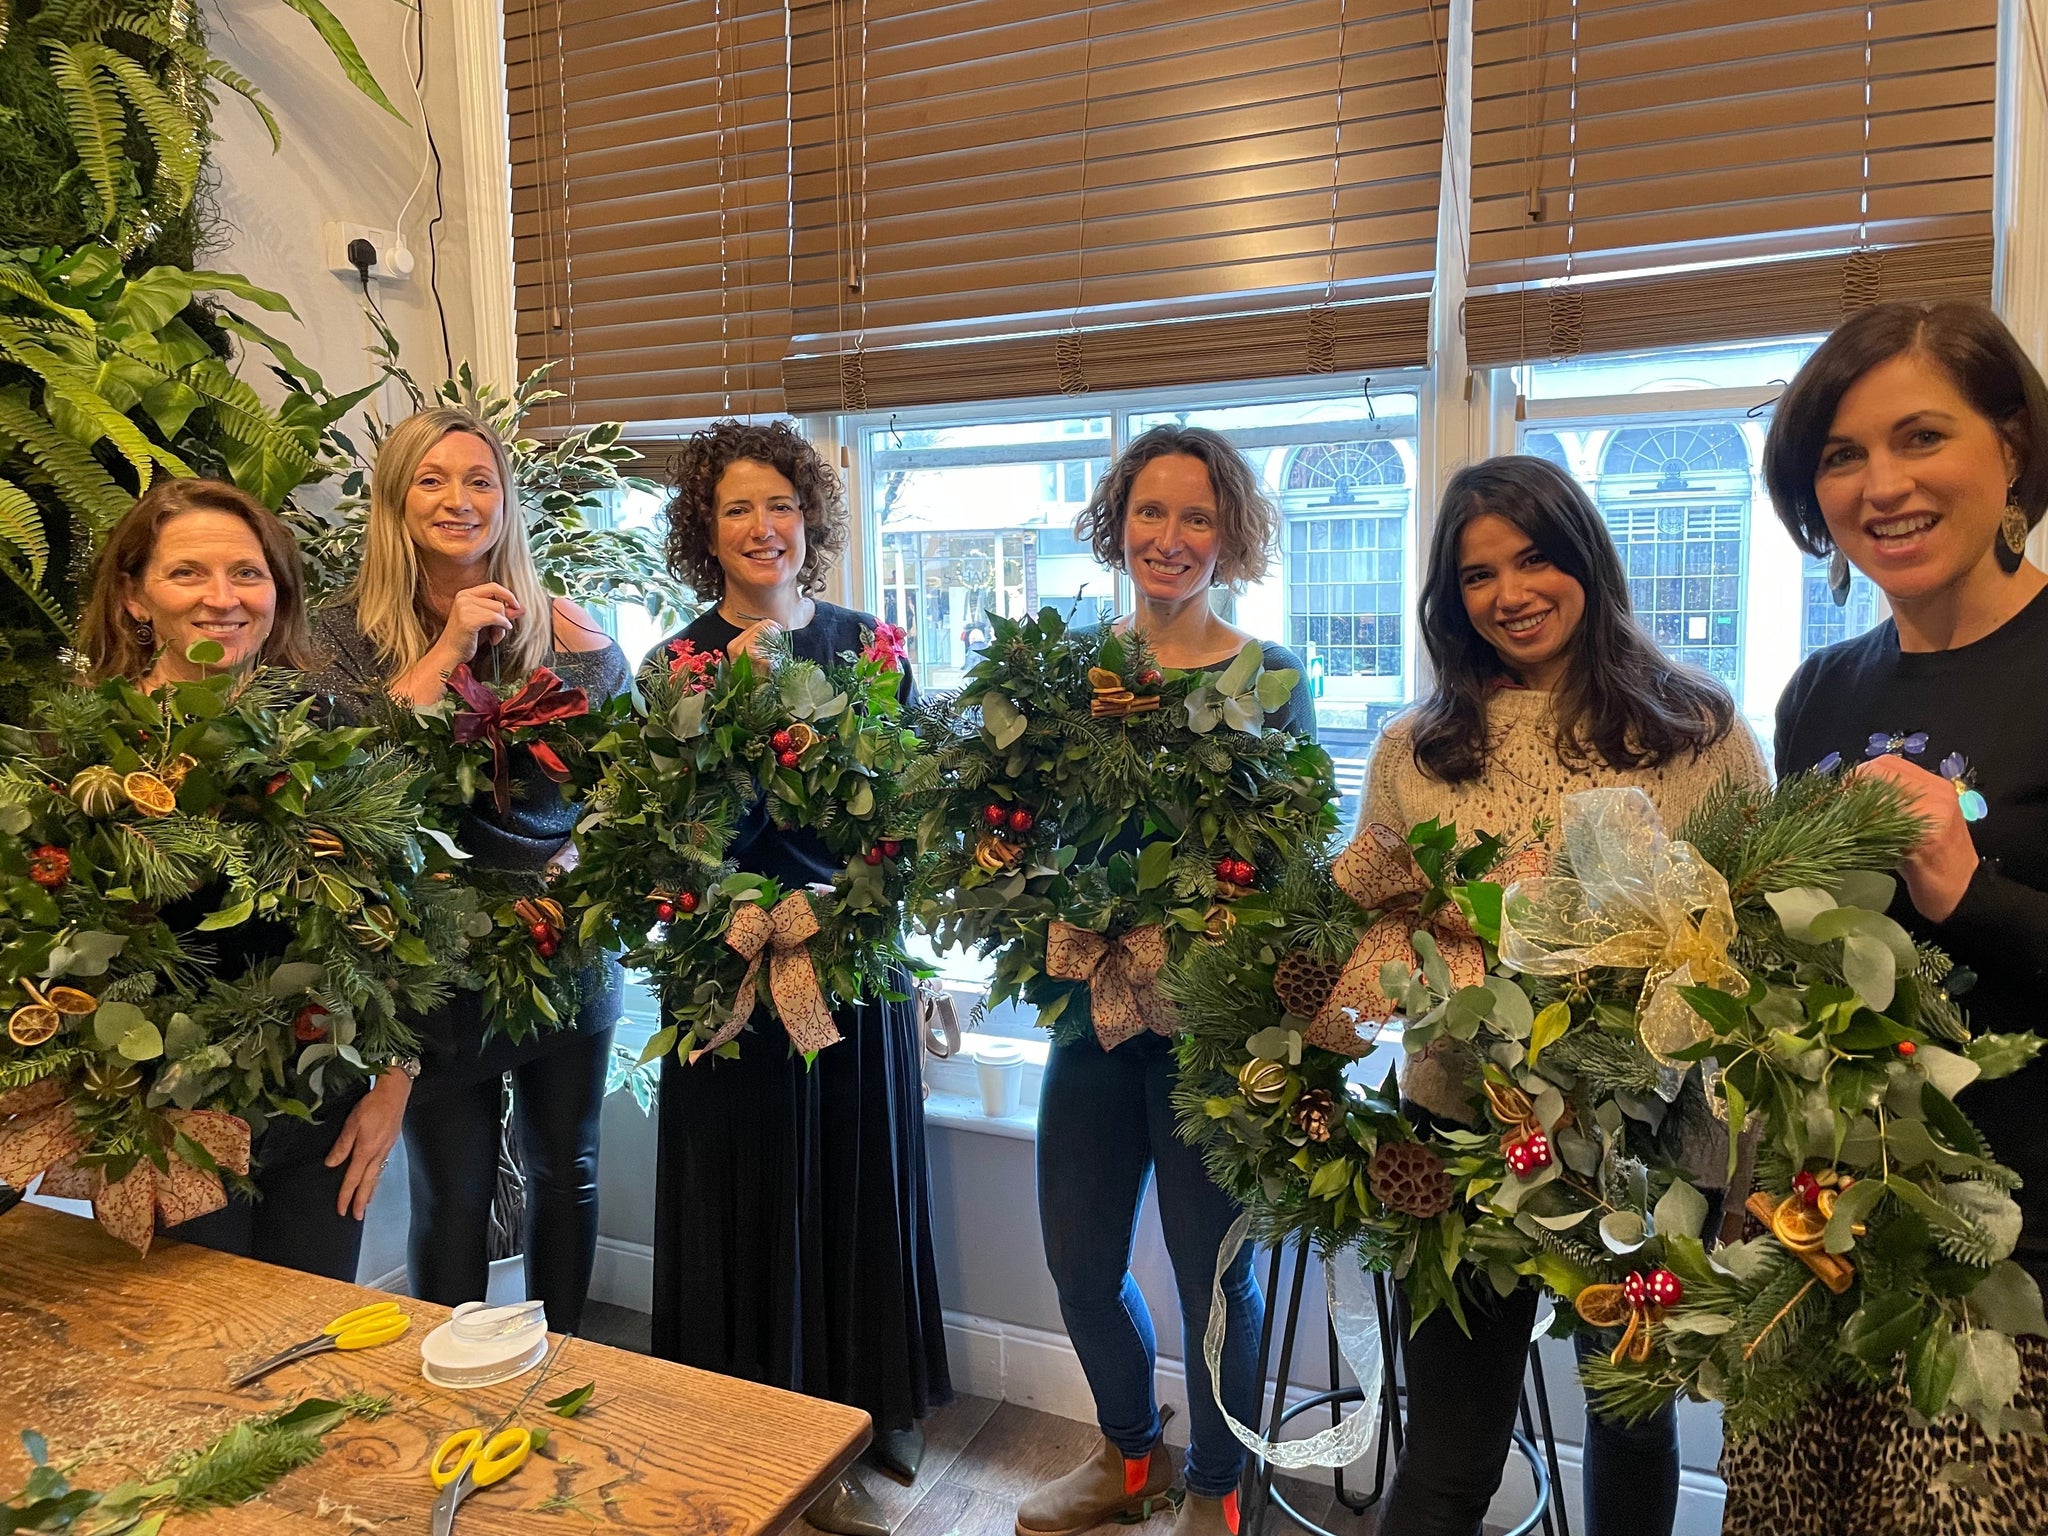 Christmas Wreath Workshop – Sunday 3rd December, Starting @ 11am (£75 per person) 2.5 hours